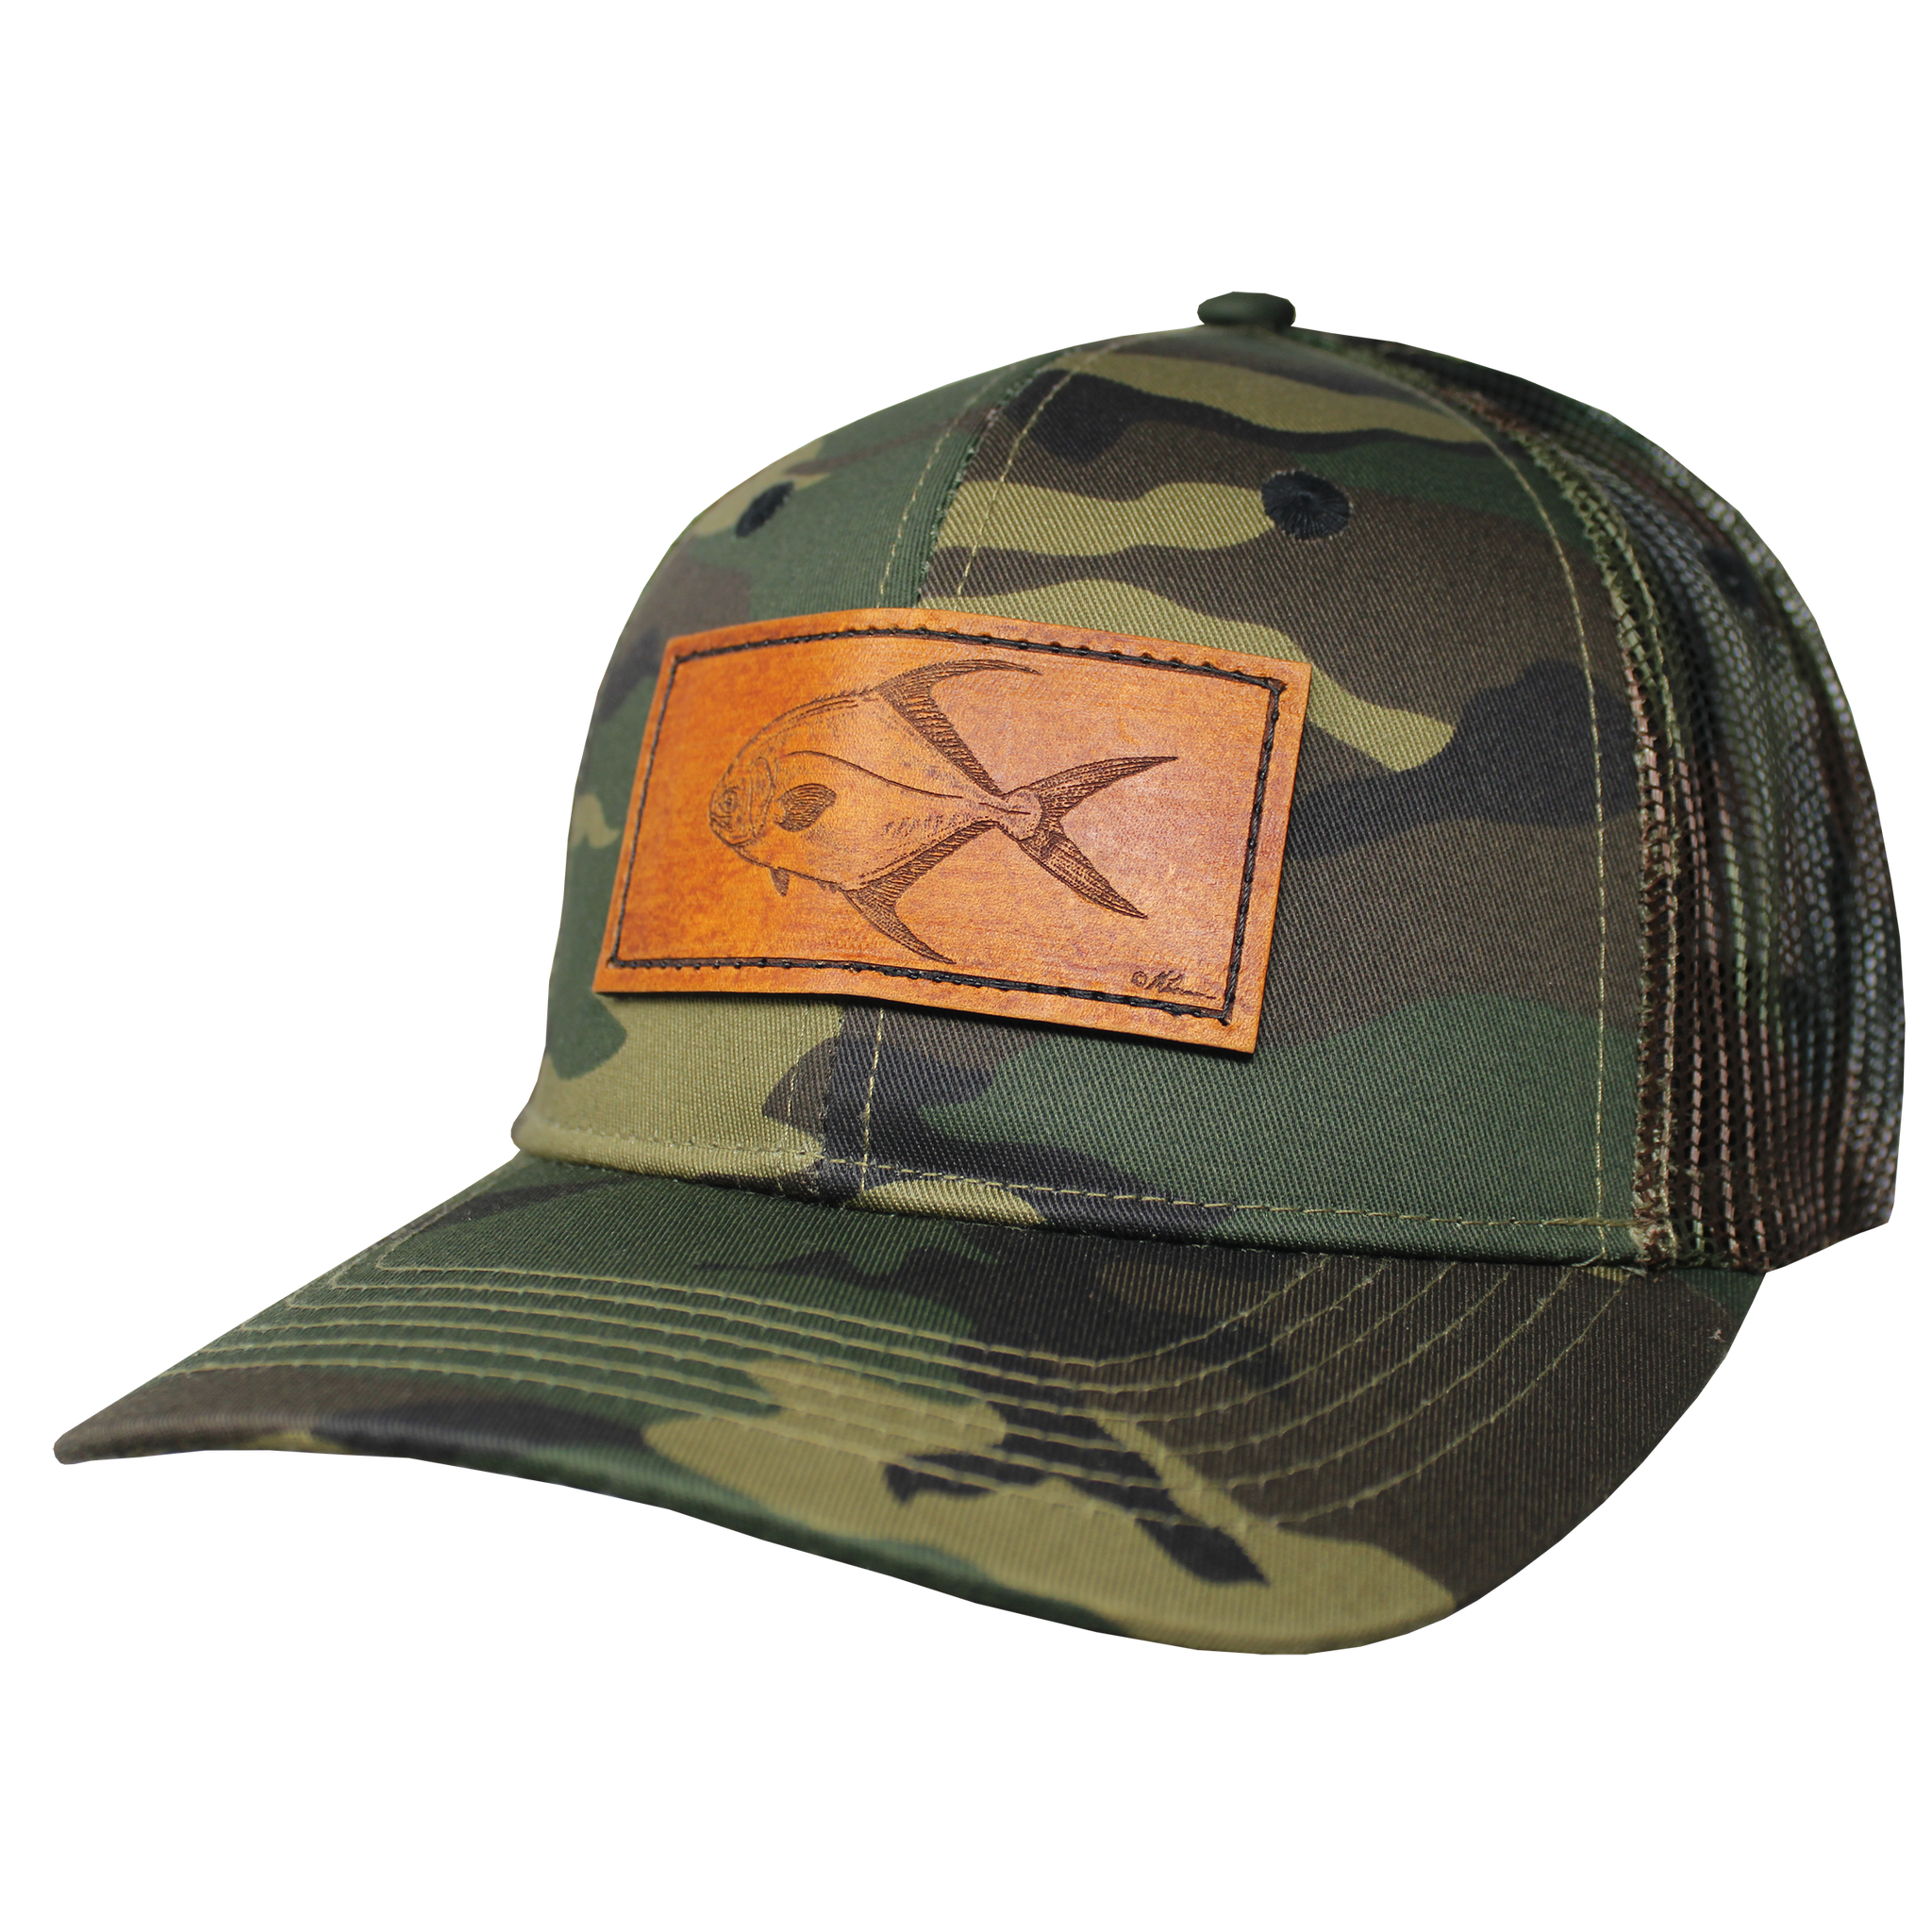 Trucker Performance Cap - Permit Leather Patch